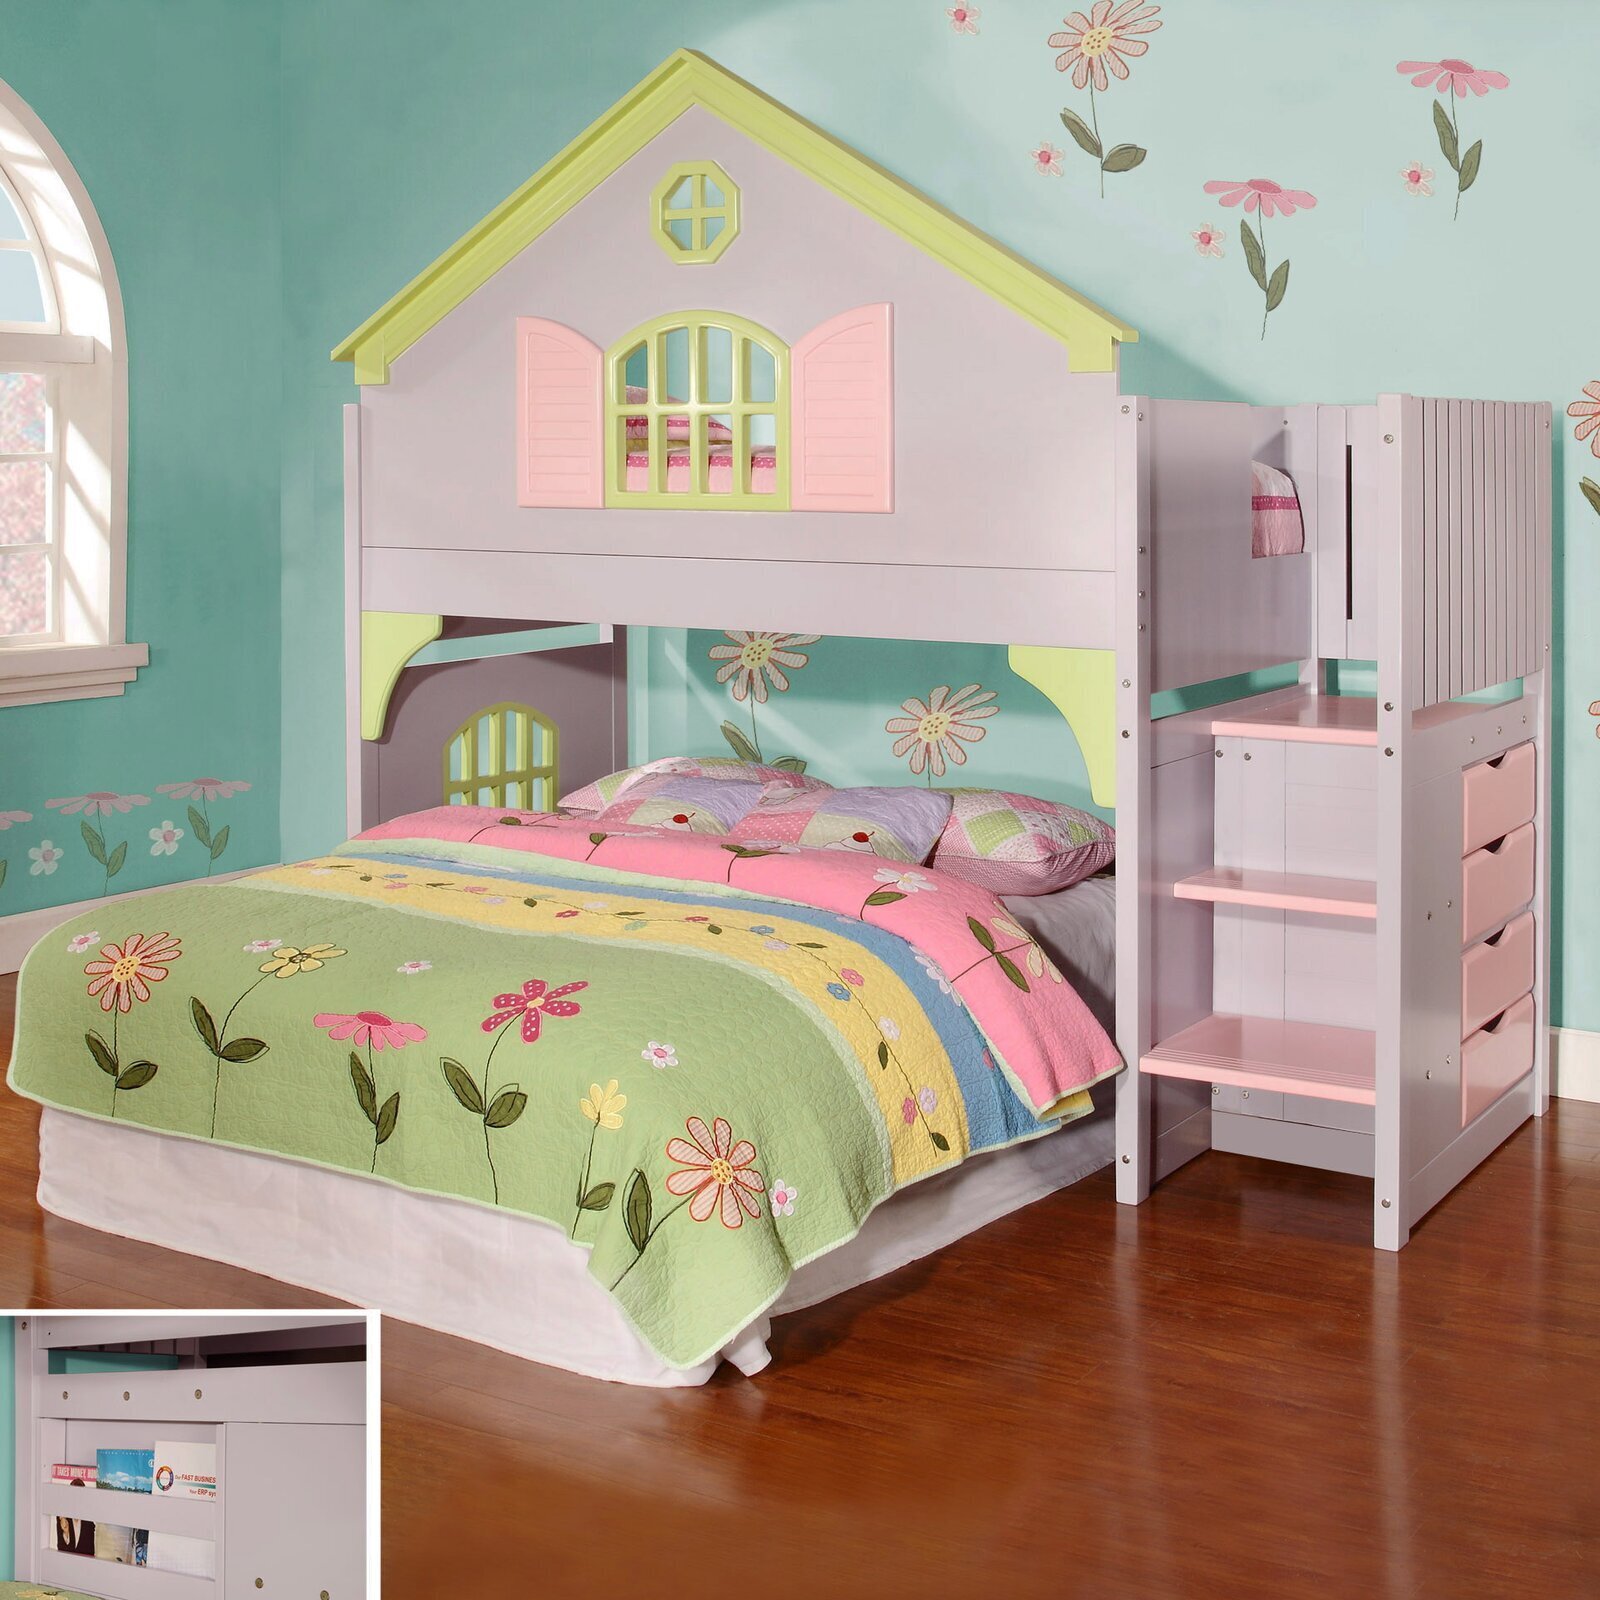 Dollhouse Loft Bed With Drawers